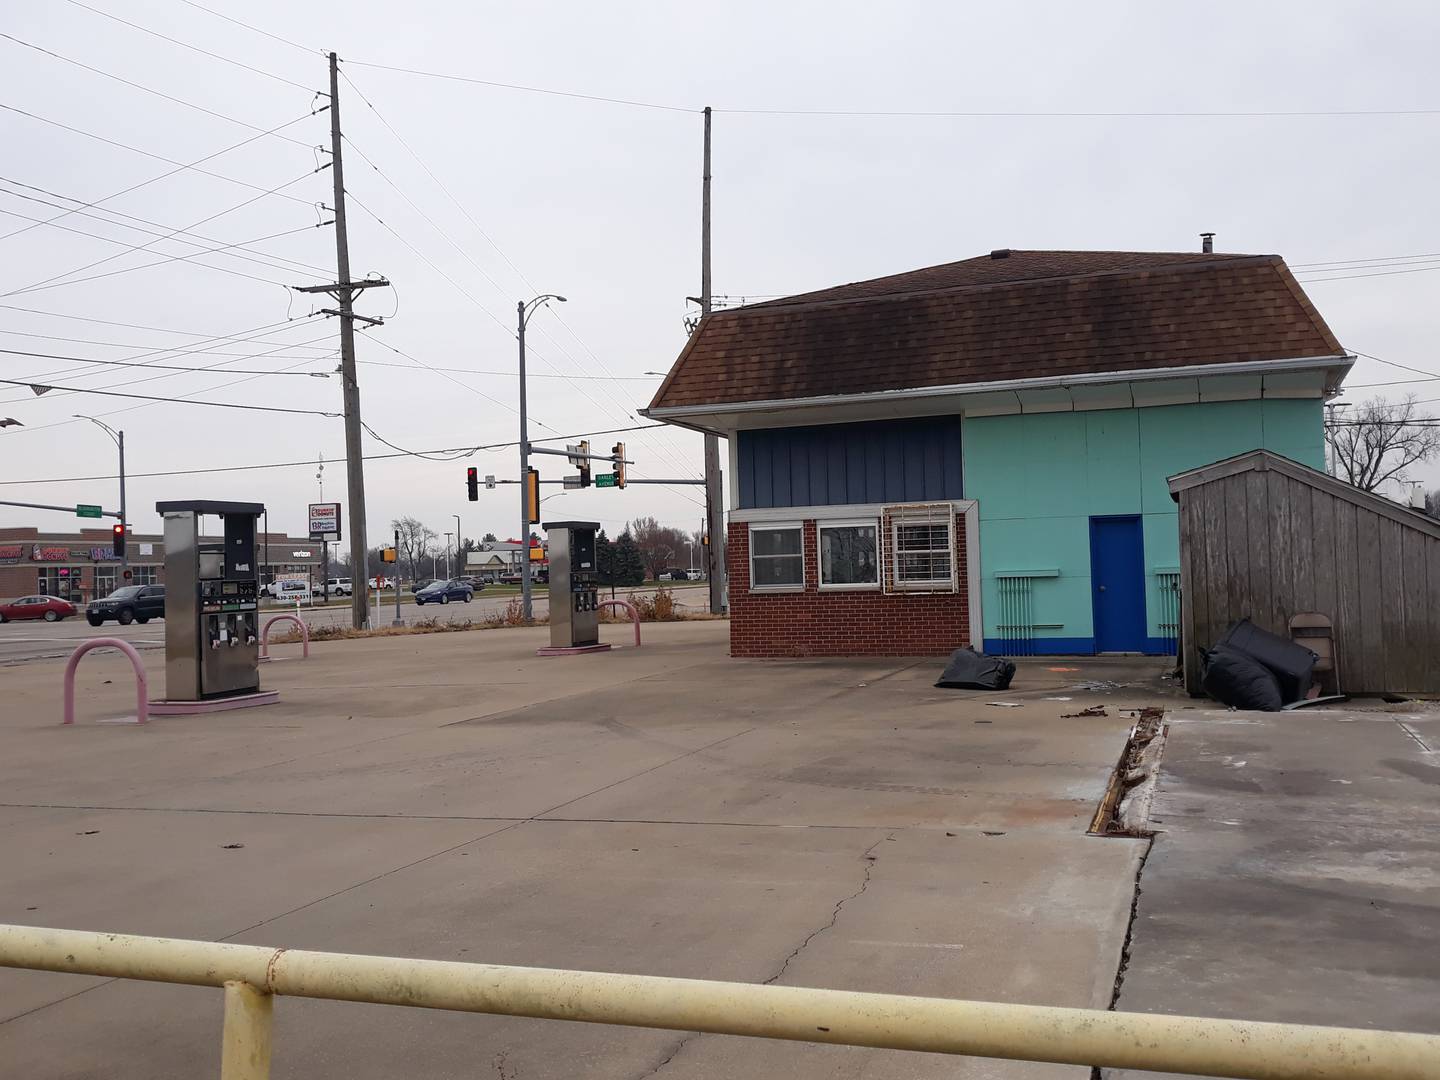 Arby’s is looking to build a location at the northwest corner of Bloomington Street and Oakley Avenue in Streator, at the former location of Gautschy’s Corner, a former gas station and auto shop.